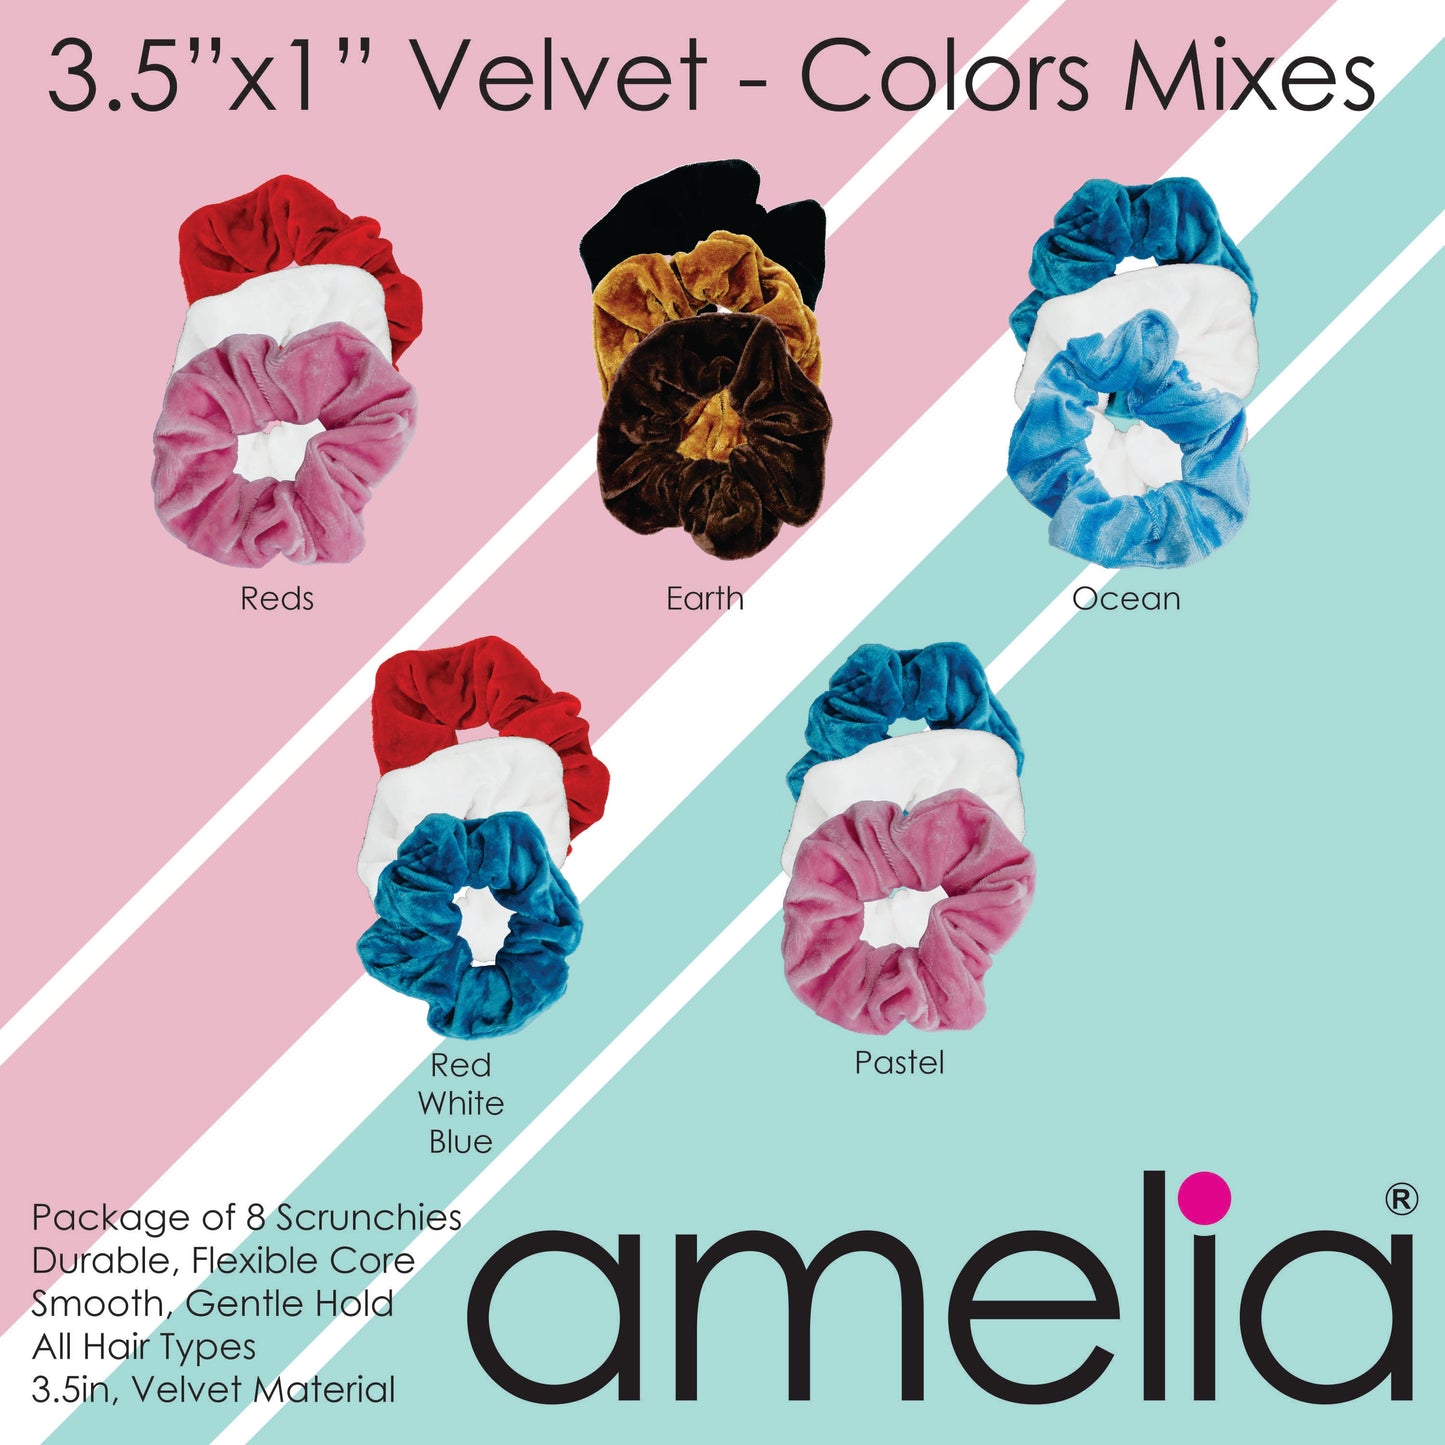 Amelia Beauty, Ocean Blend Velvet Scrunchies, 3.5in Diameter, Gentle on Hair, Strong Hold, No Snag, No Dents or Creases. 8 Pack